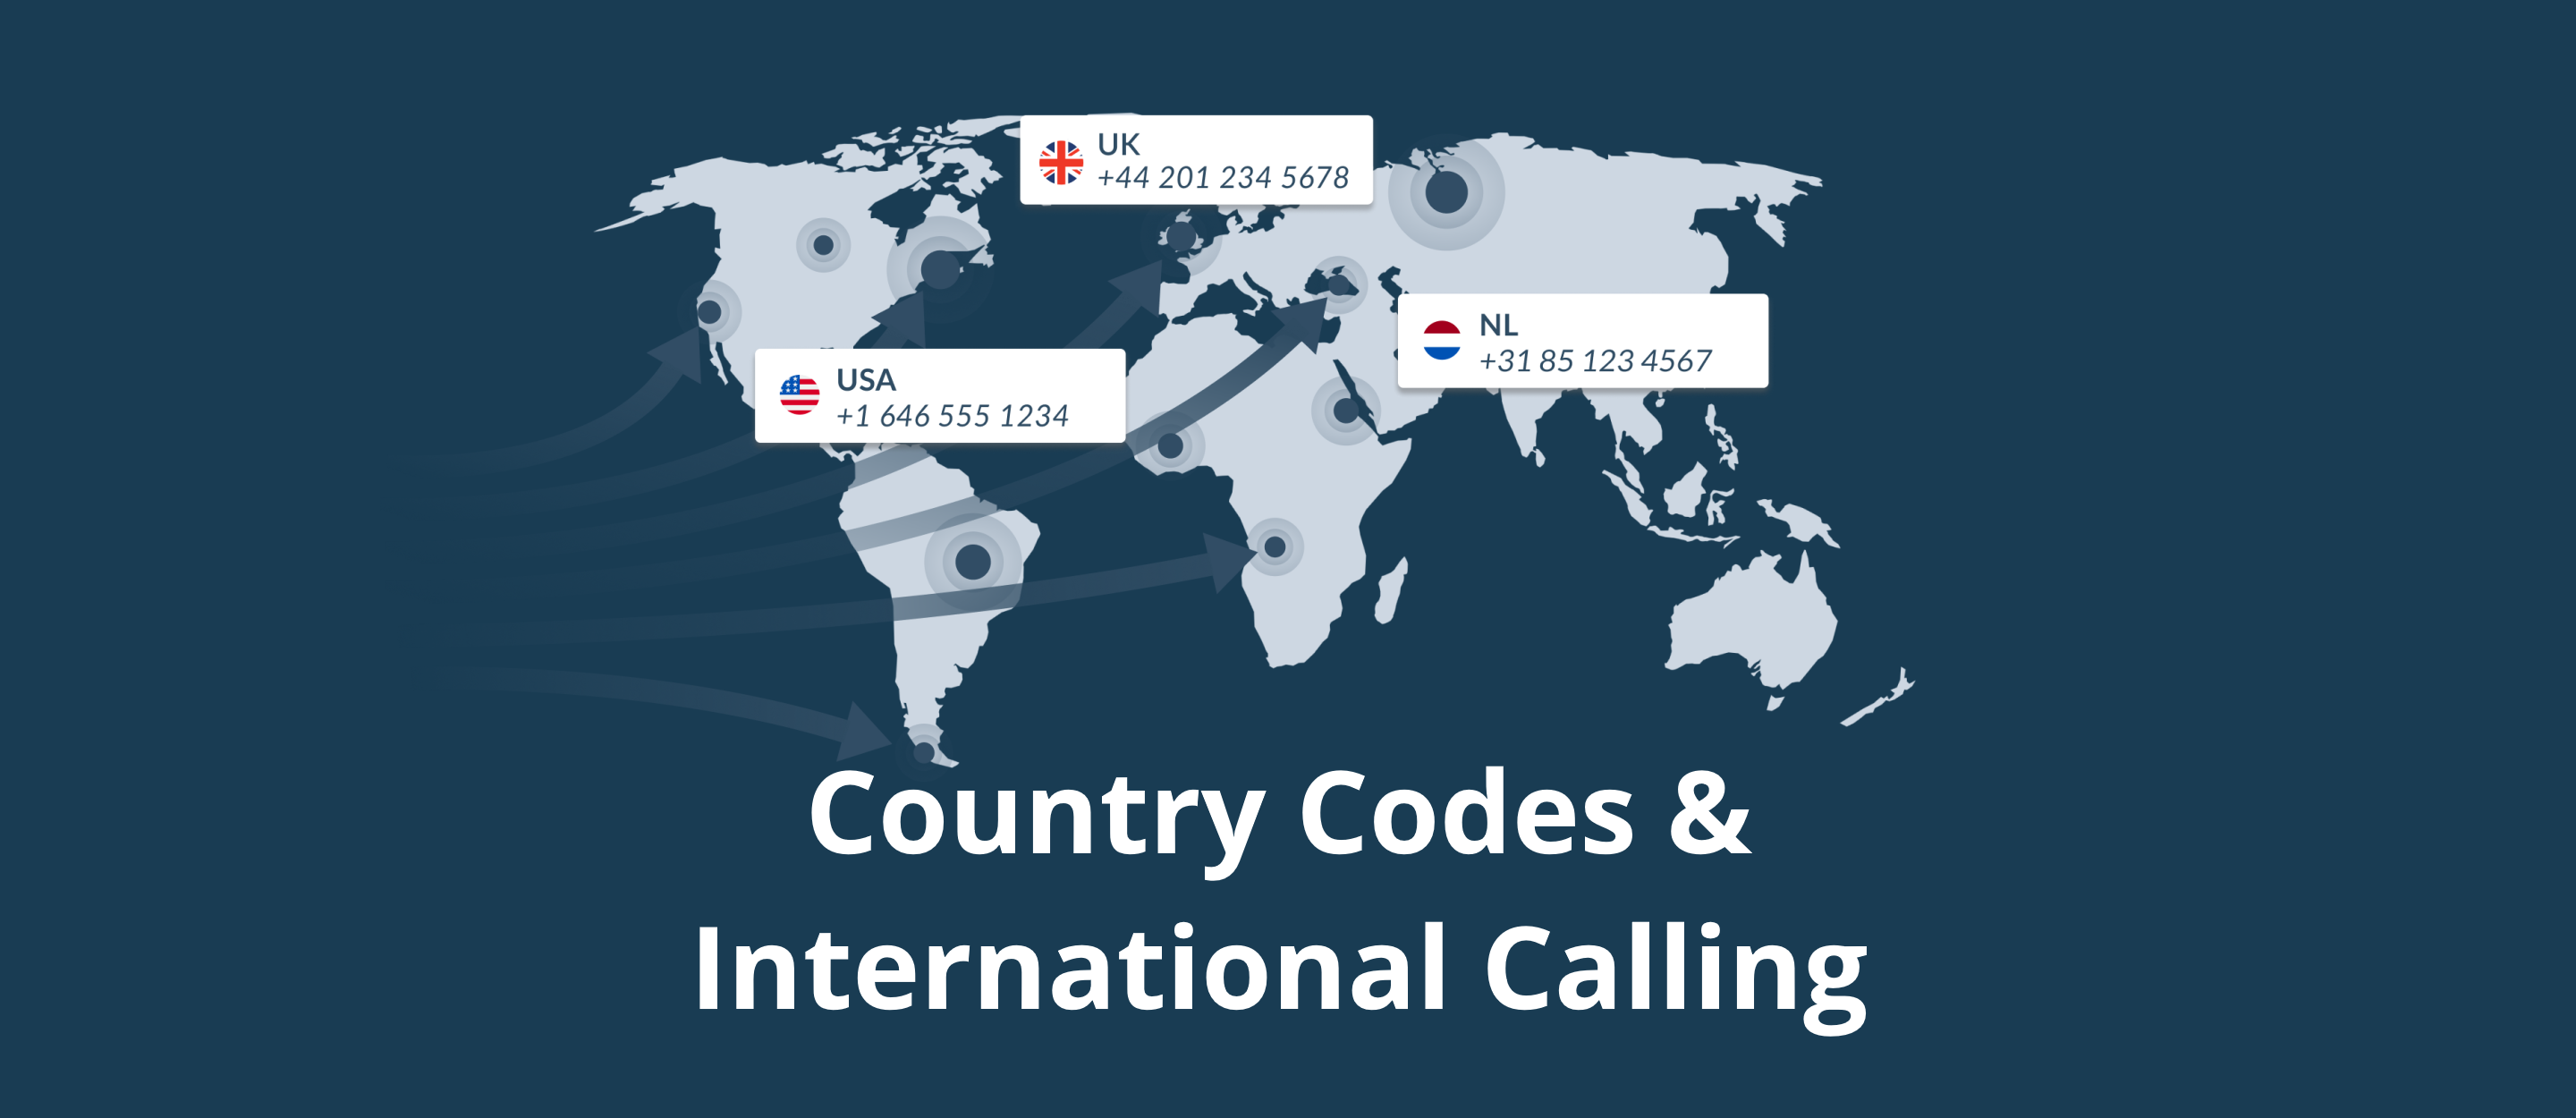 Country Codes and International Calling